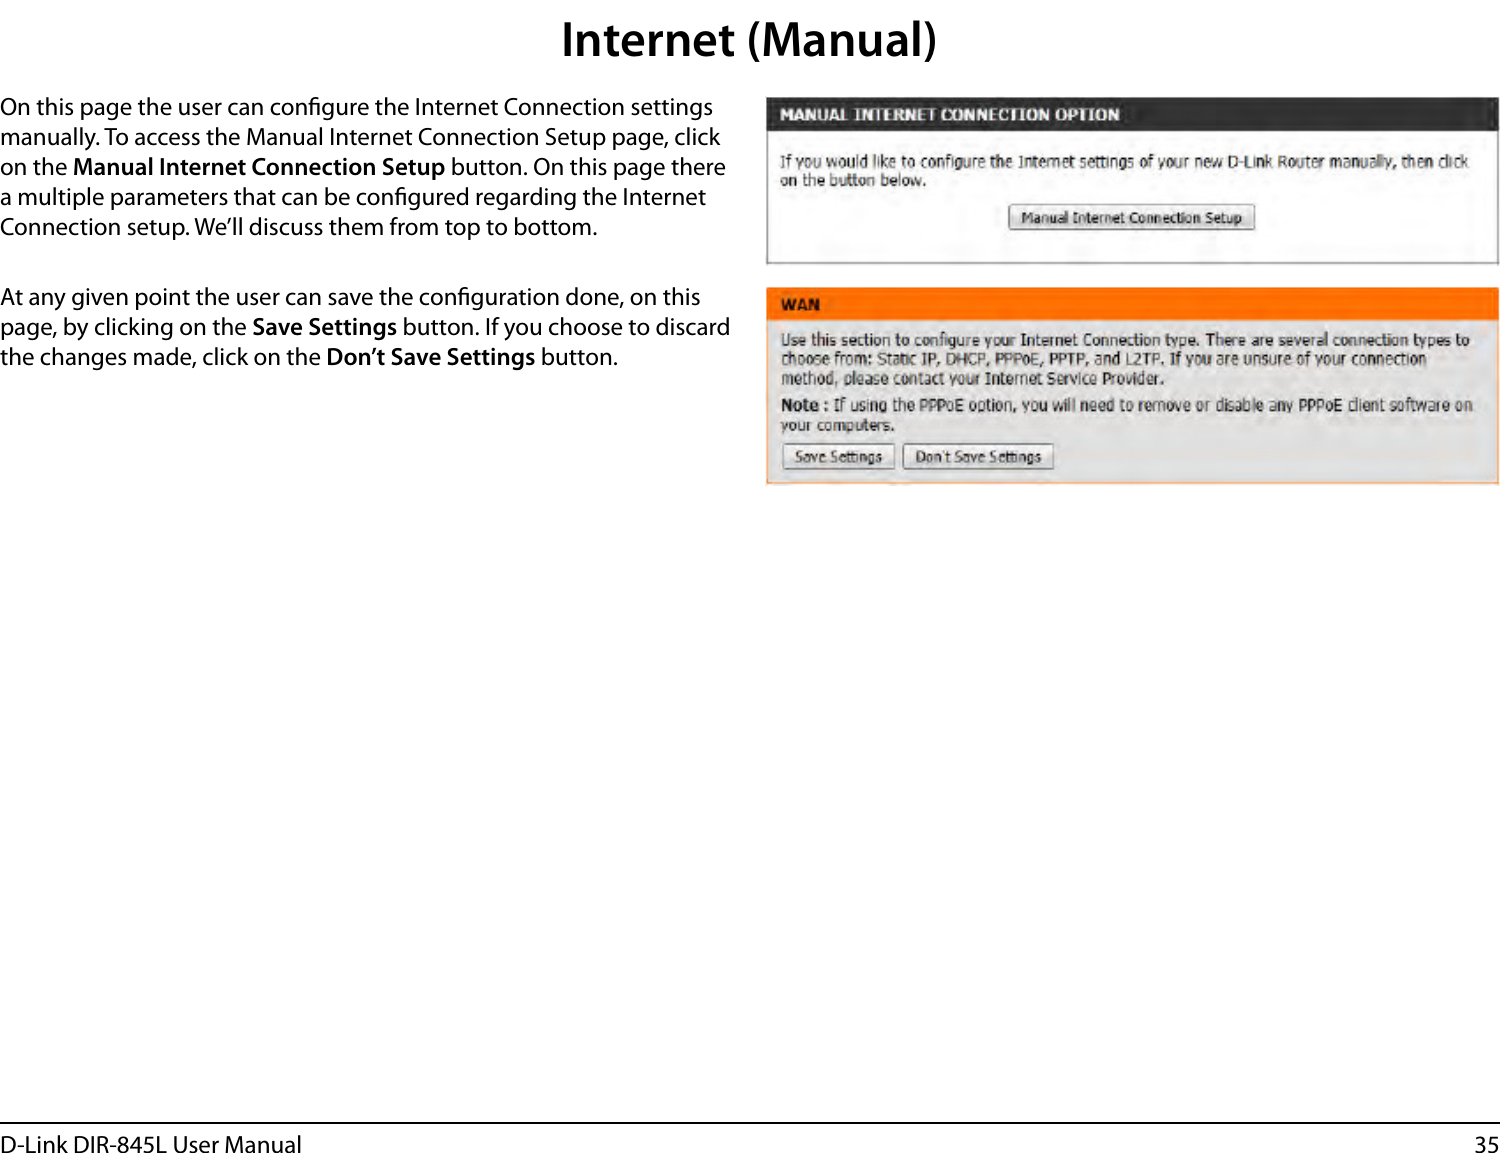 35D-Link DIR-845L User ManualInternet (Manual)On this page the user can congure the Internet Connection settings manually. To access the Manual Internet Connection Setup page, click on the Manual Internet Connection Setup button. On this page there a multiple parameters that can be congured regarding the Internet Connection setup. We’ll discuss them from top to bottom.At any given point the user can save the conguration done, on this page, by clicking on the Save Settings button. If you choose to discard the changes made, click on the Don’t Save Settings button.